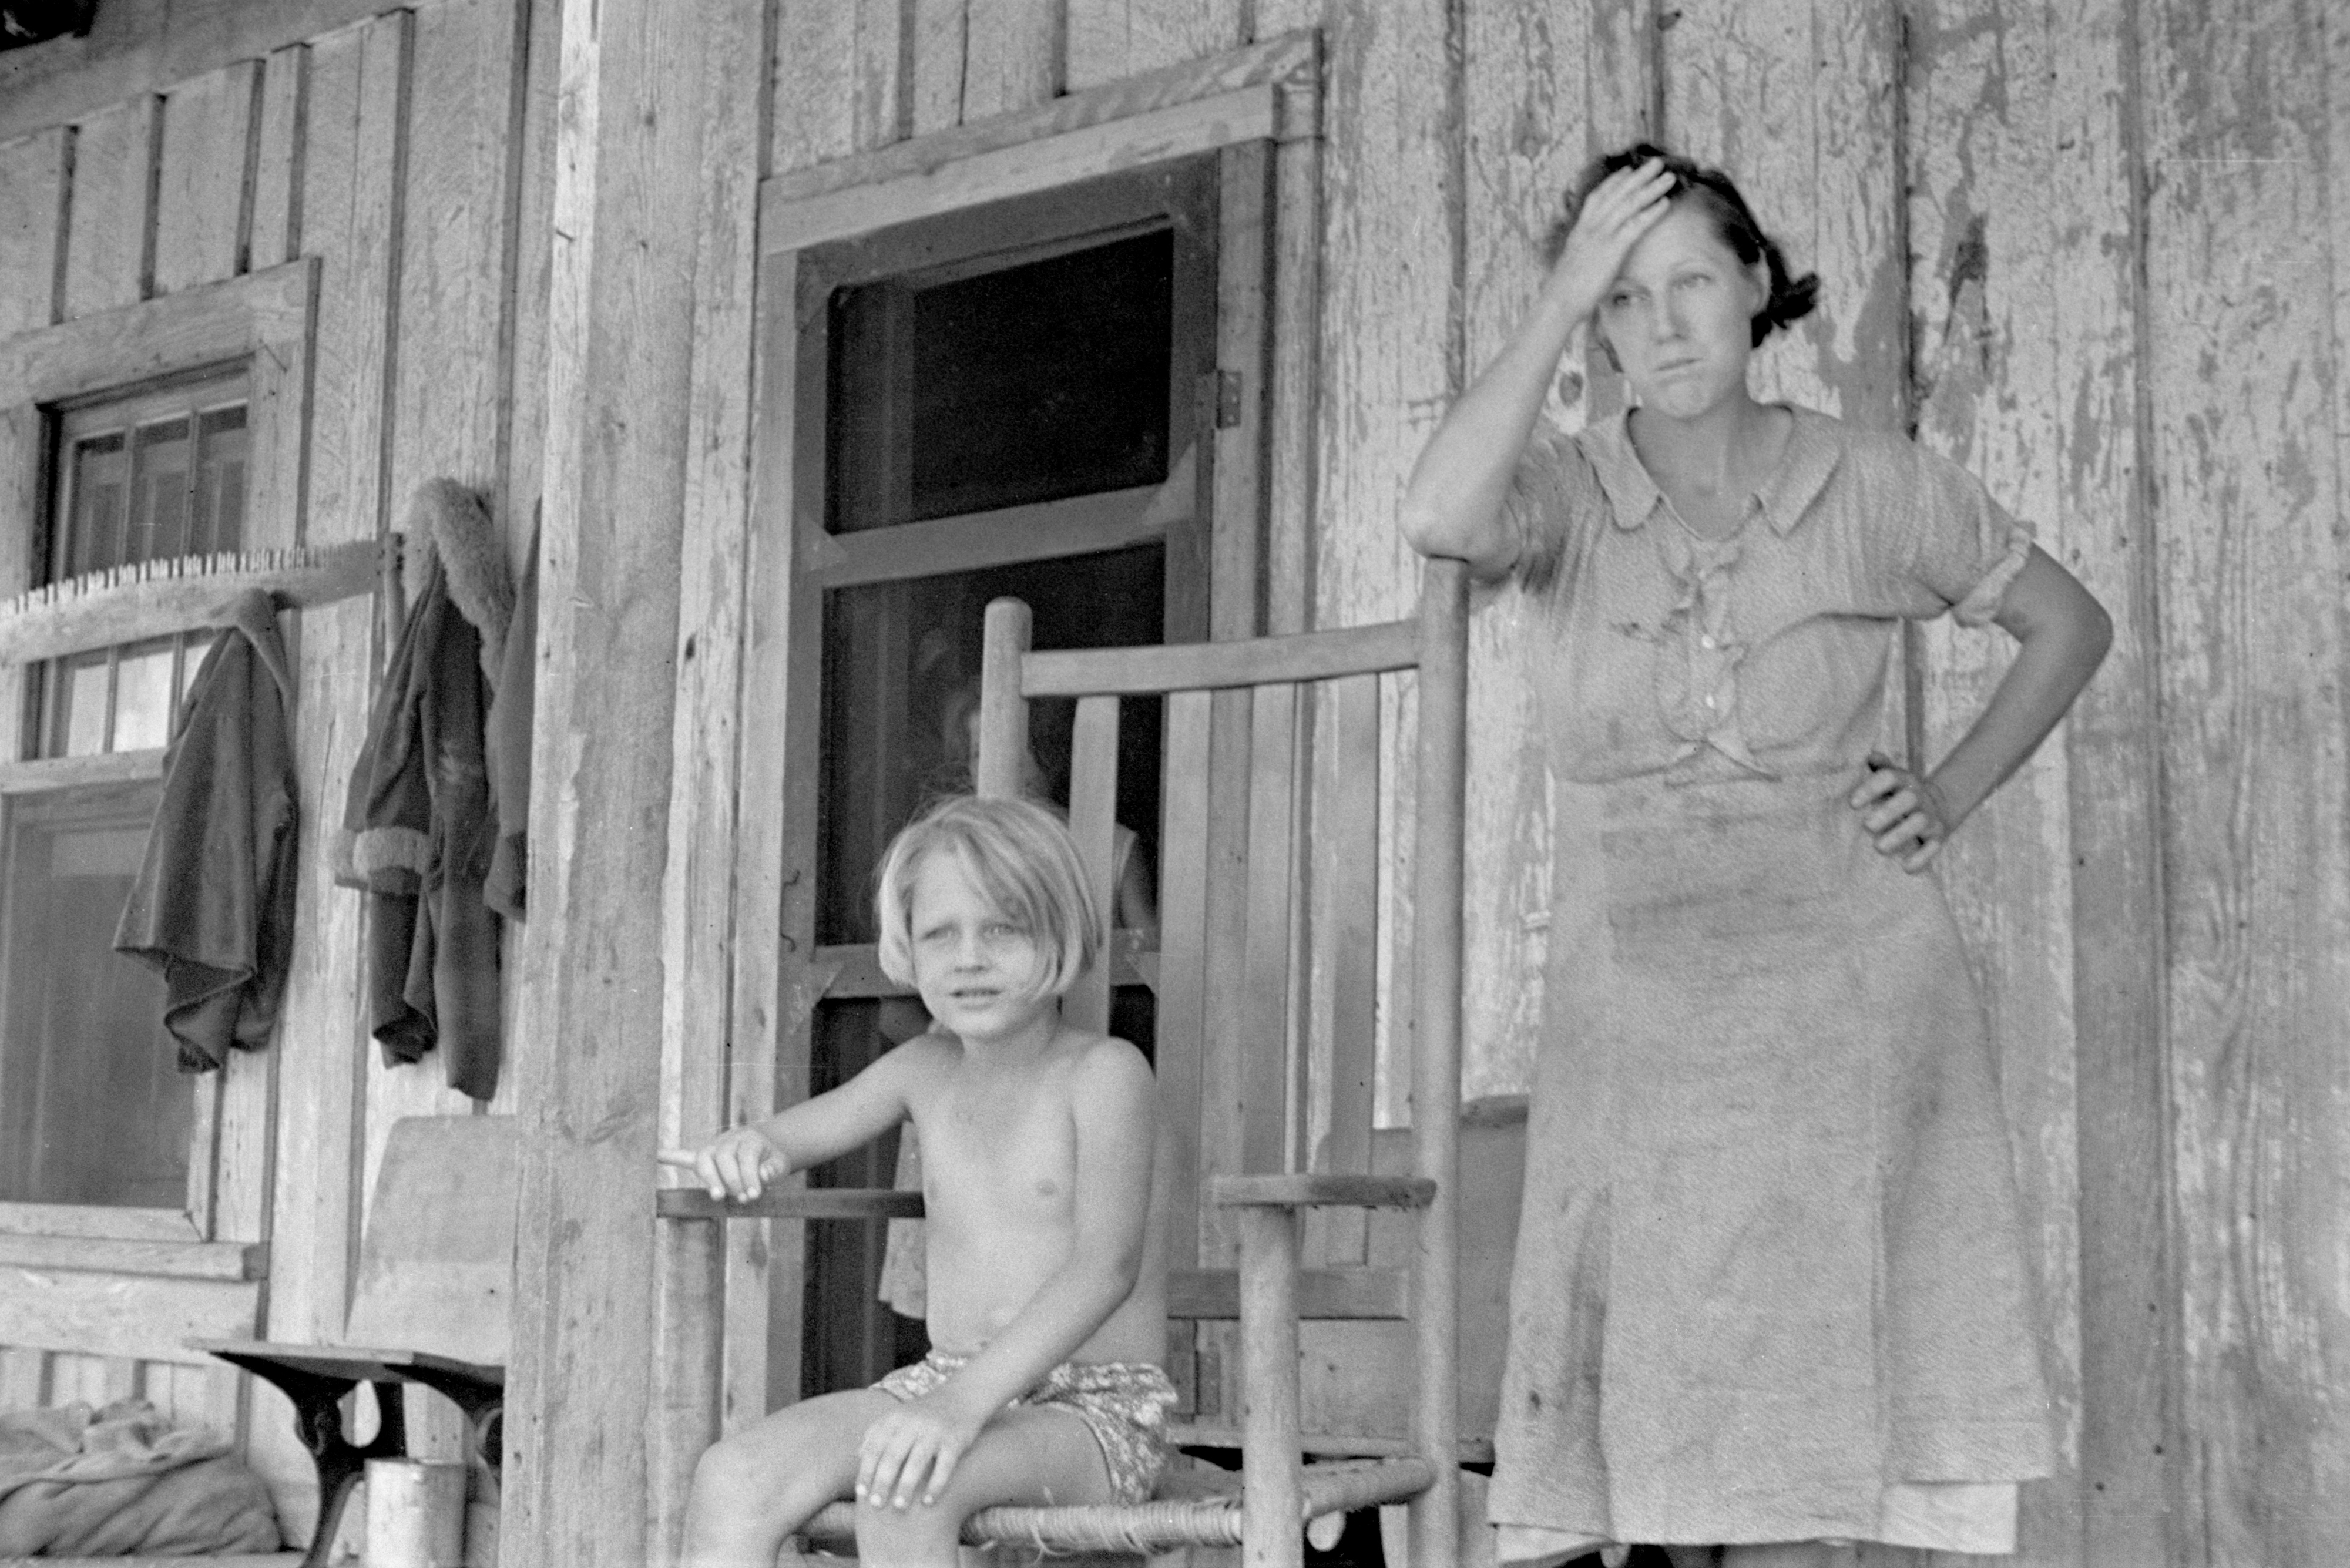 A woman stands with her hand on her forehead next to a shirtless child sitting on a wooden rocking chair on a rustic wooden porch